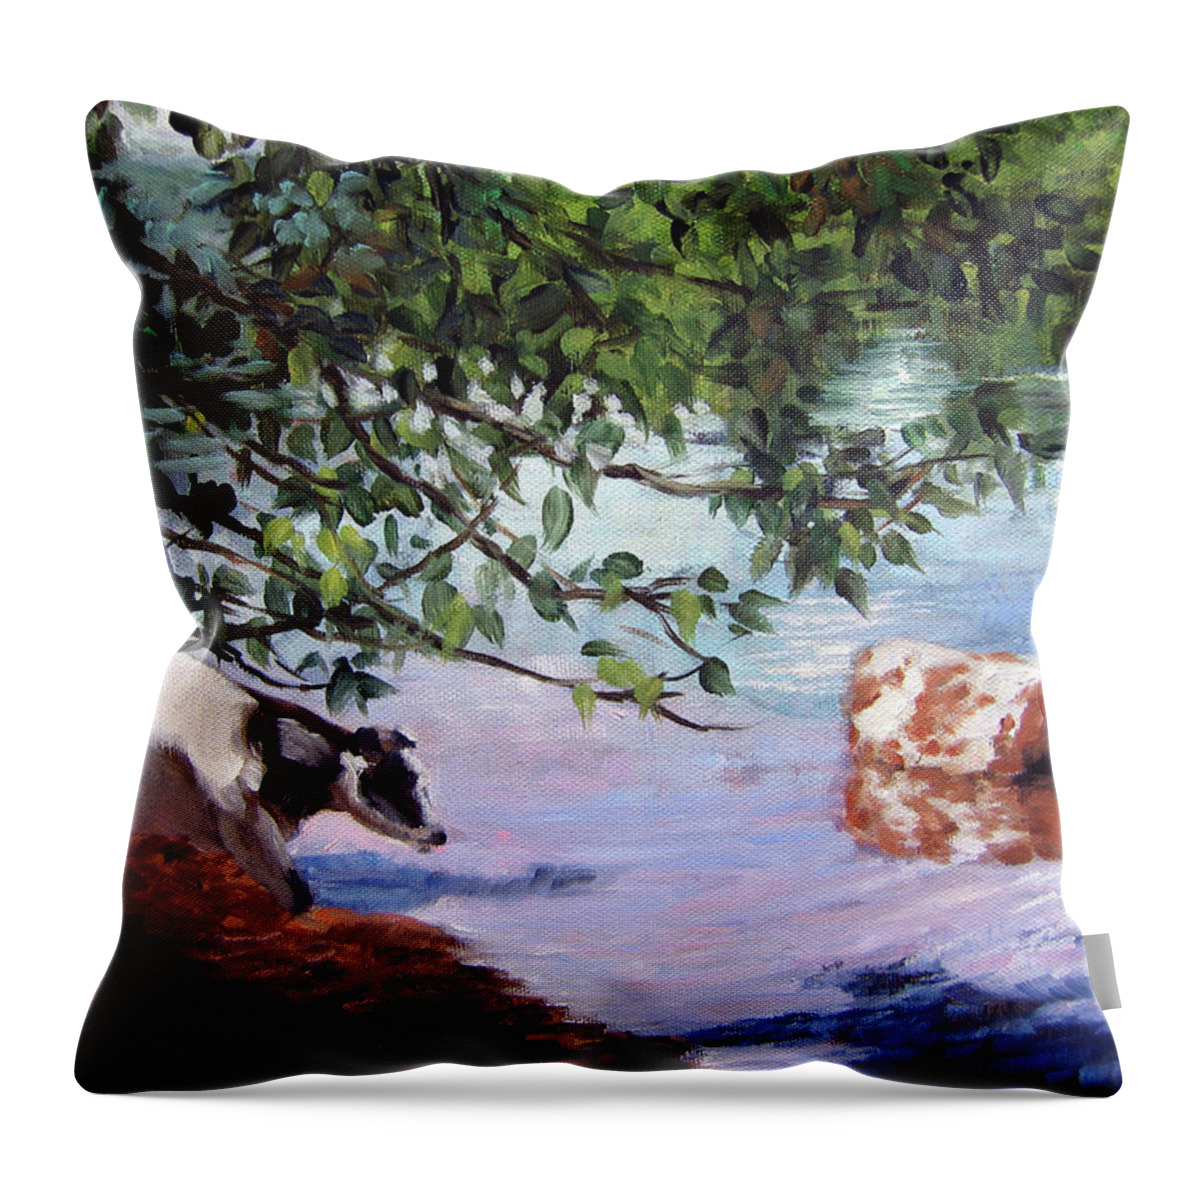 Cows Wading Throw Pillow featuring the painting Wading by Marie Witte